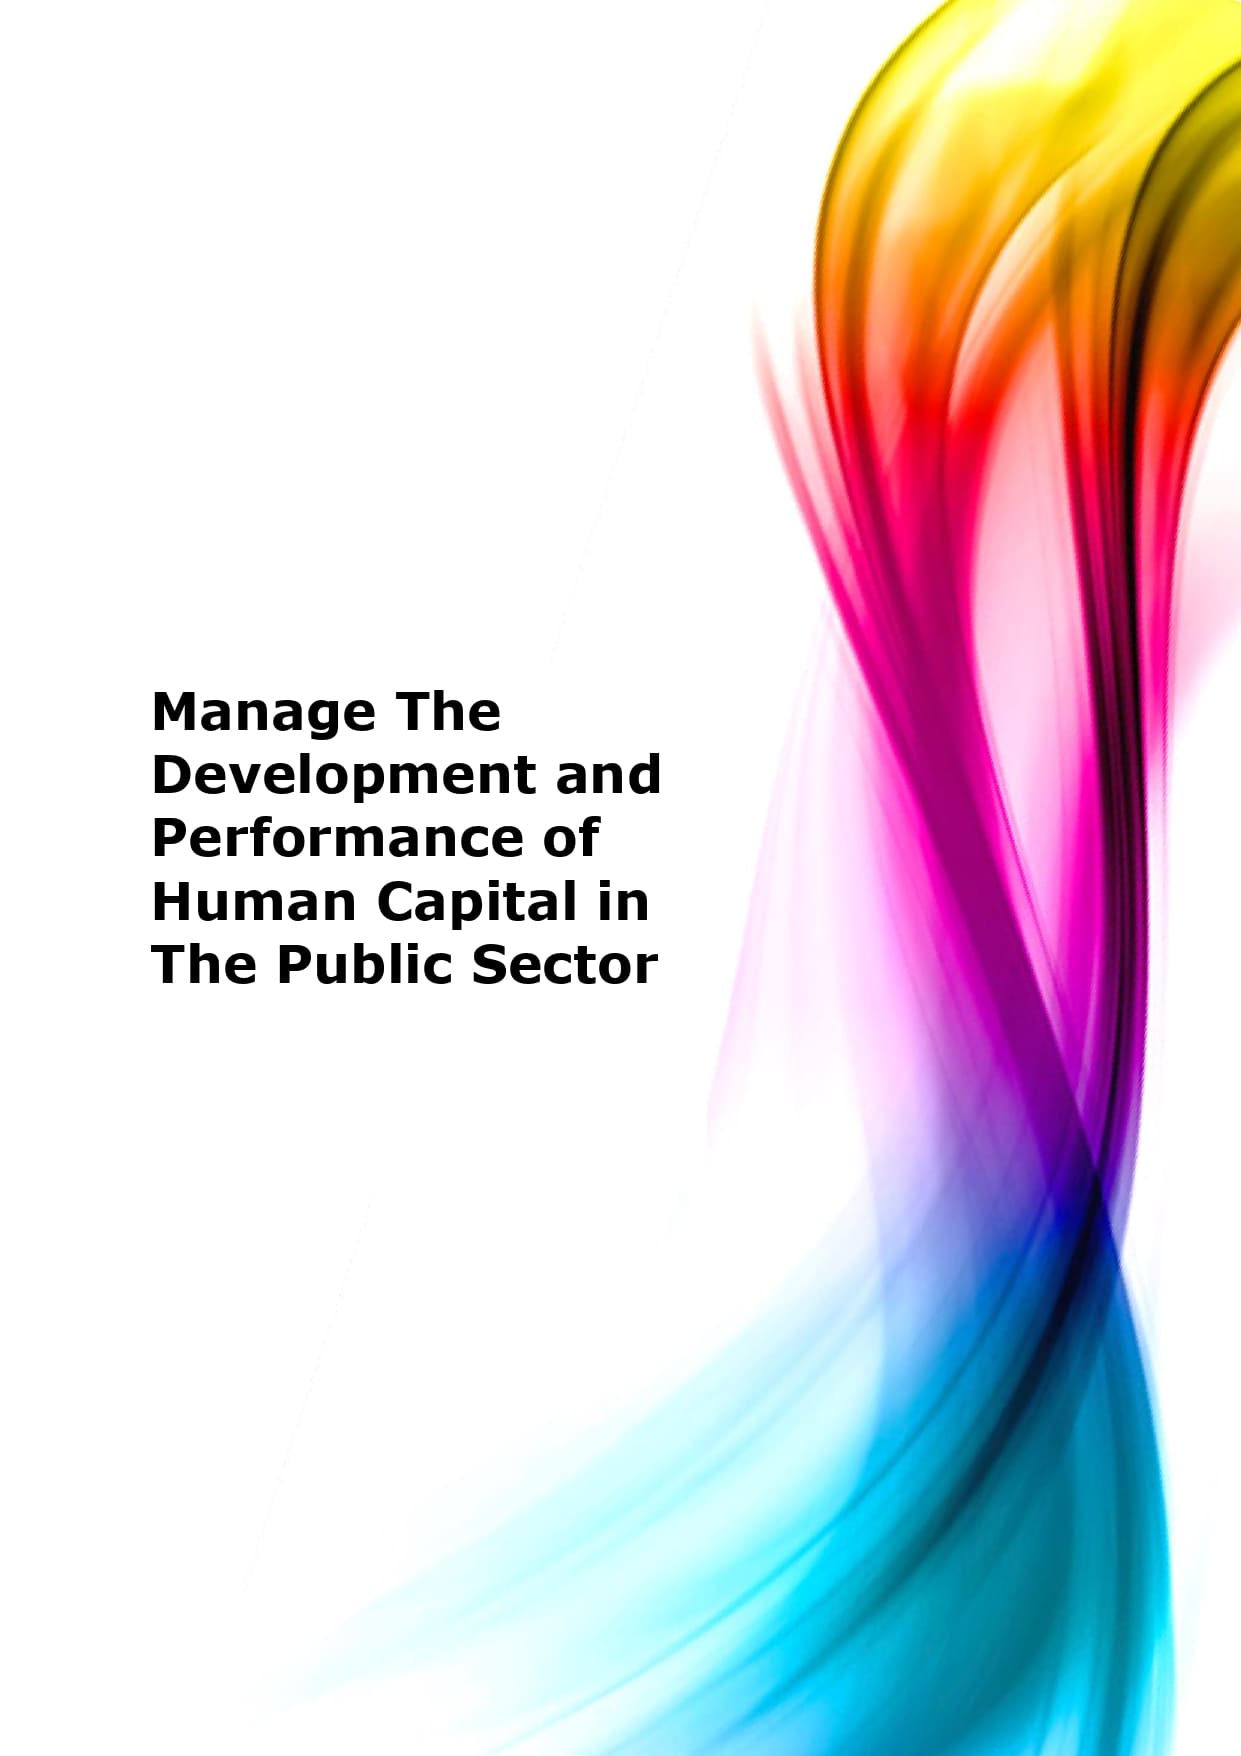 Manage the development and performance of human capital in the public sector